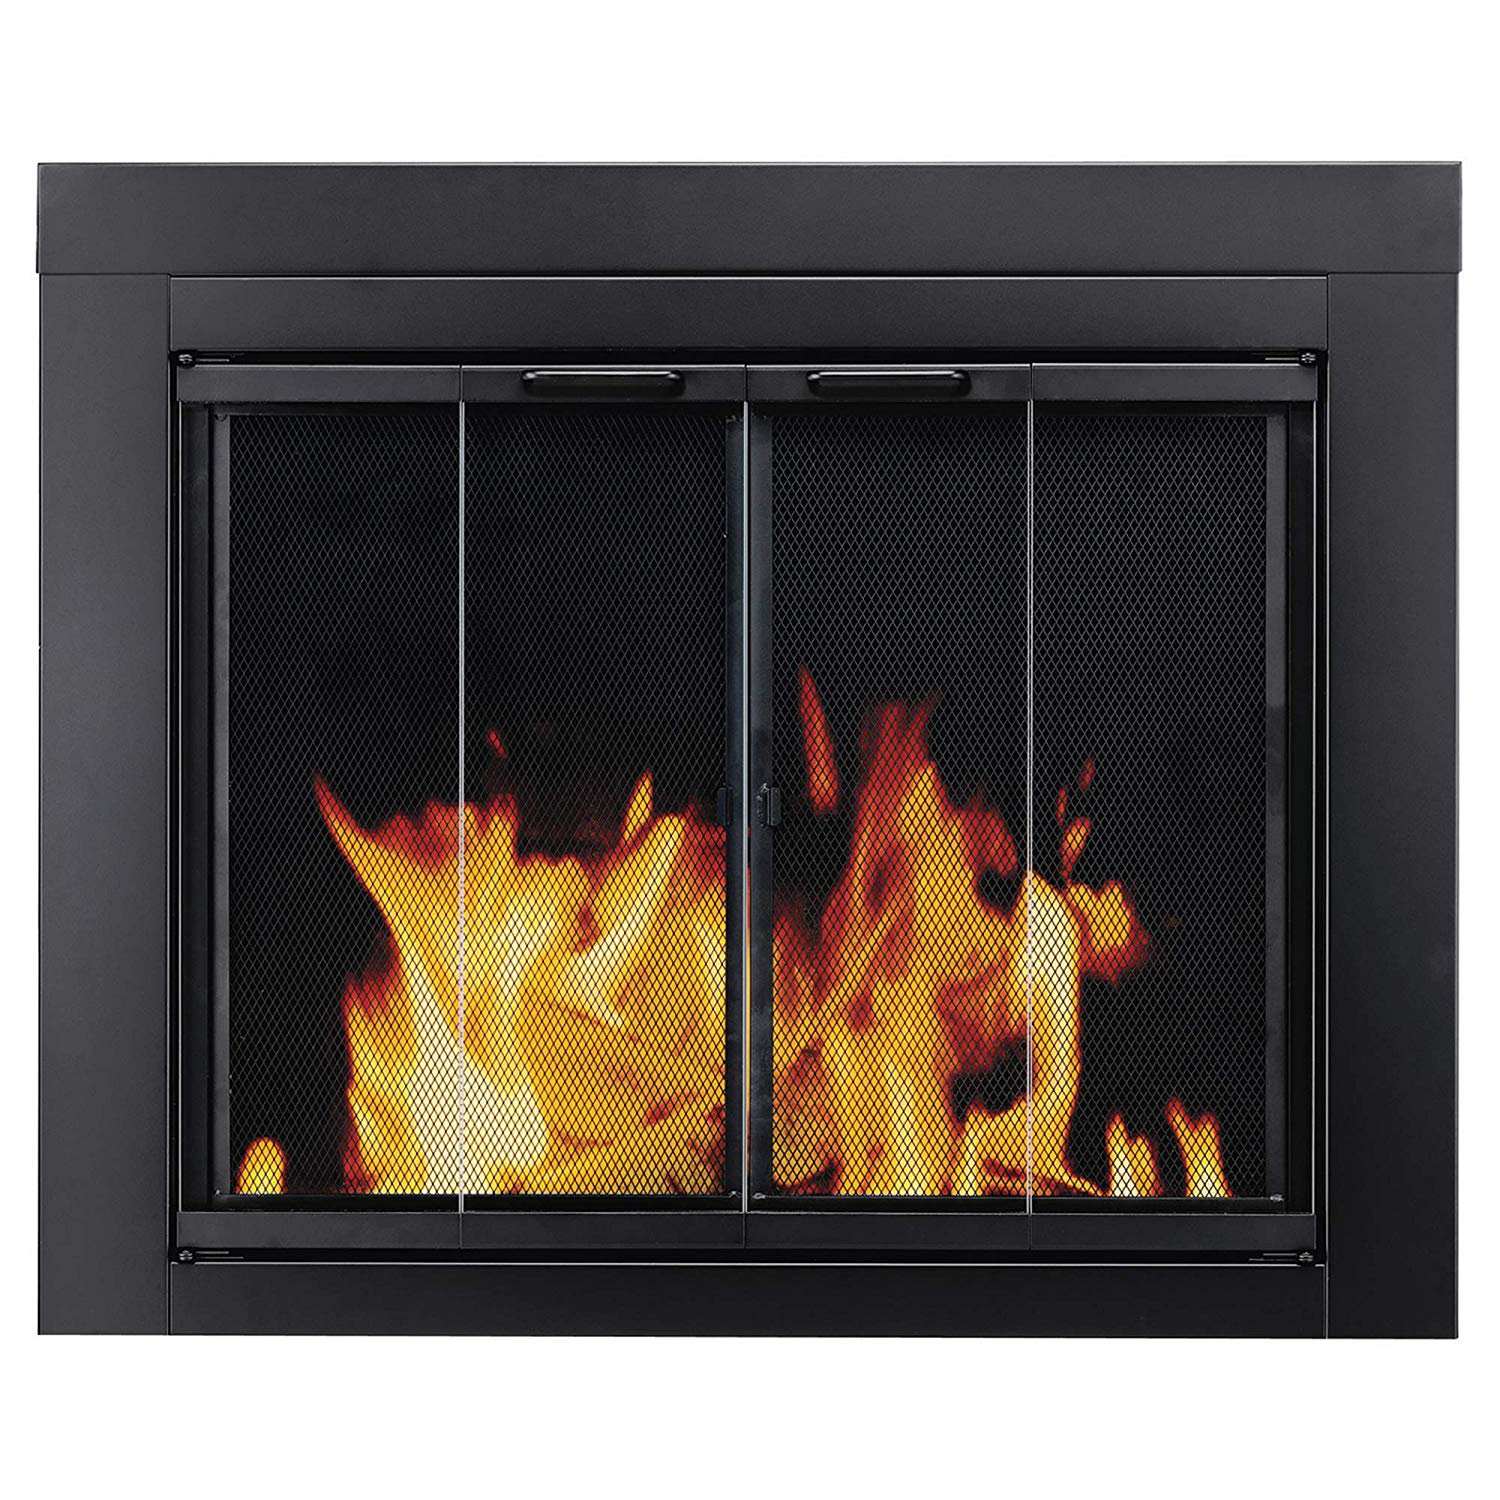 Center Room Fireplace Unique Pleasant Hearth at 1000 ascot Fireplace Glass Door Black Small